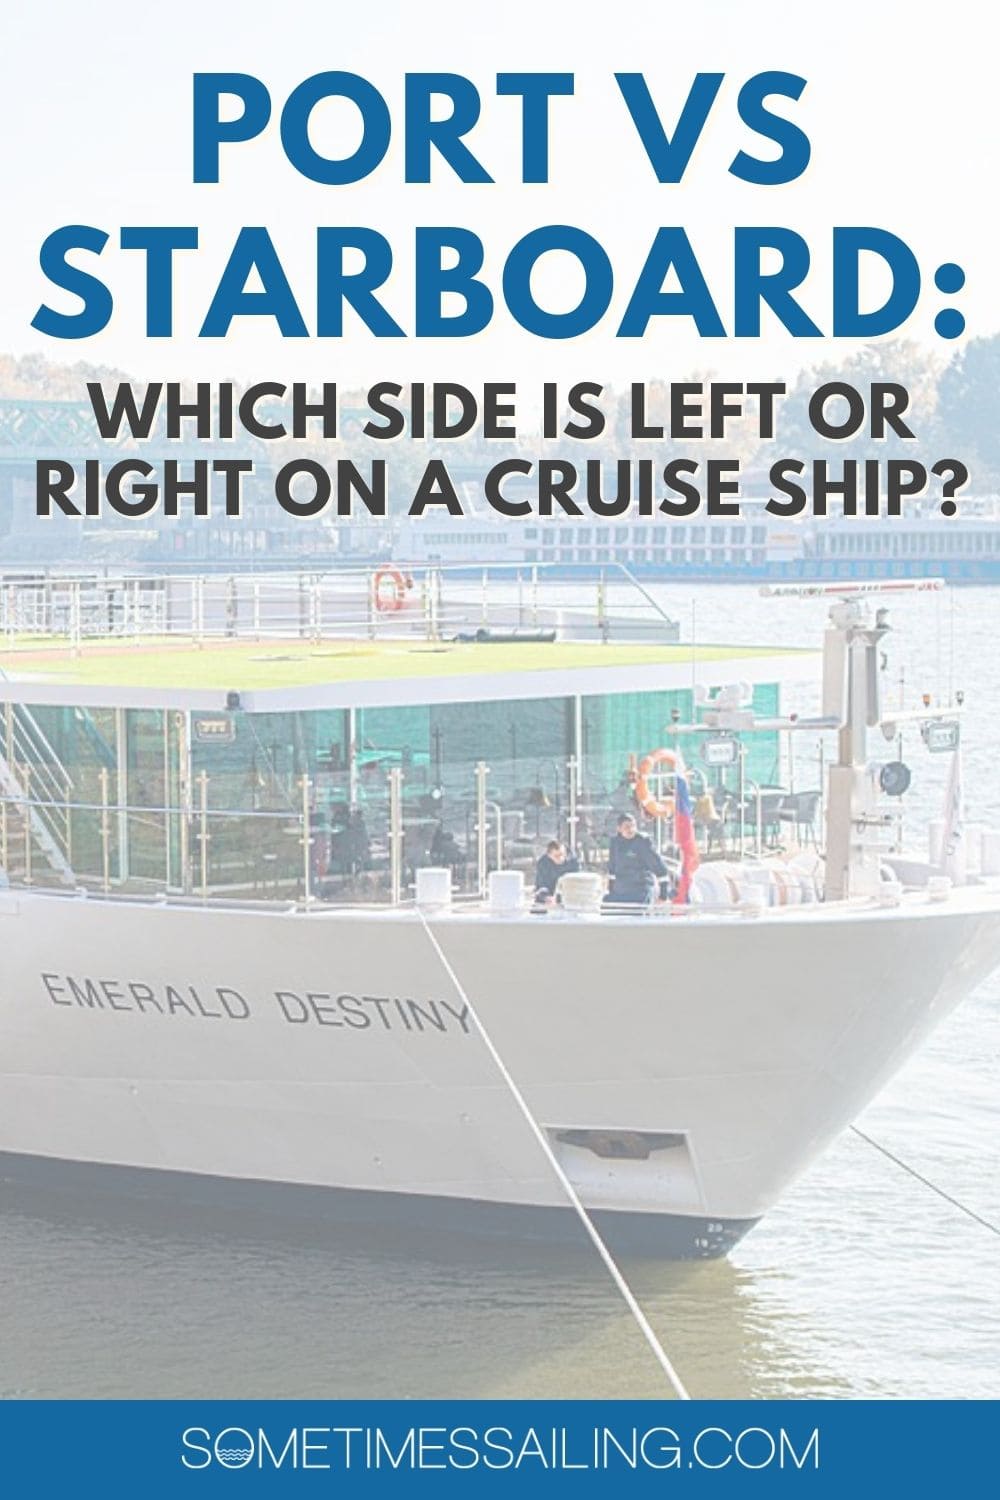 Port vs Starboard: which side is left or right on a cruise ship?